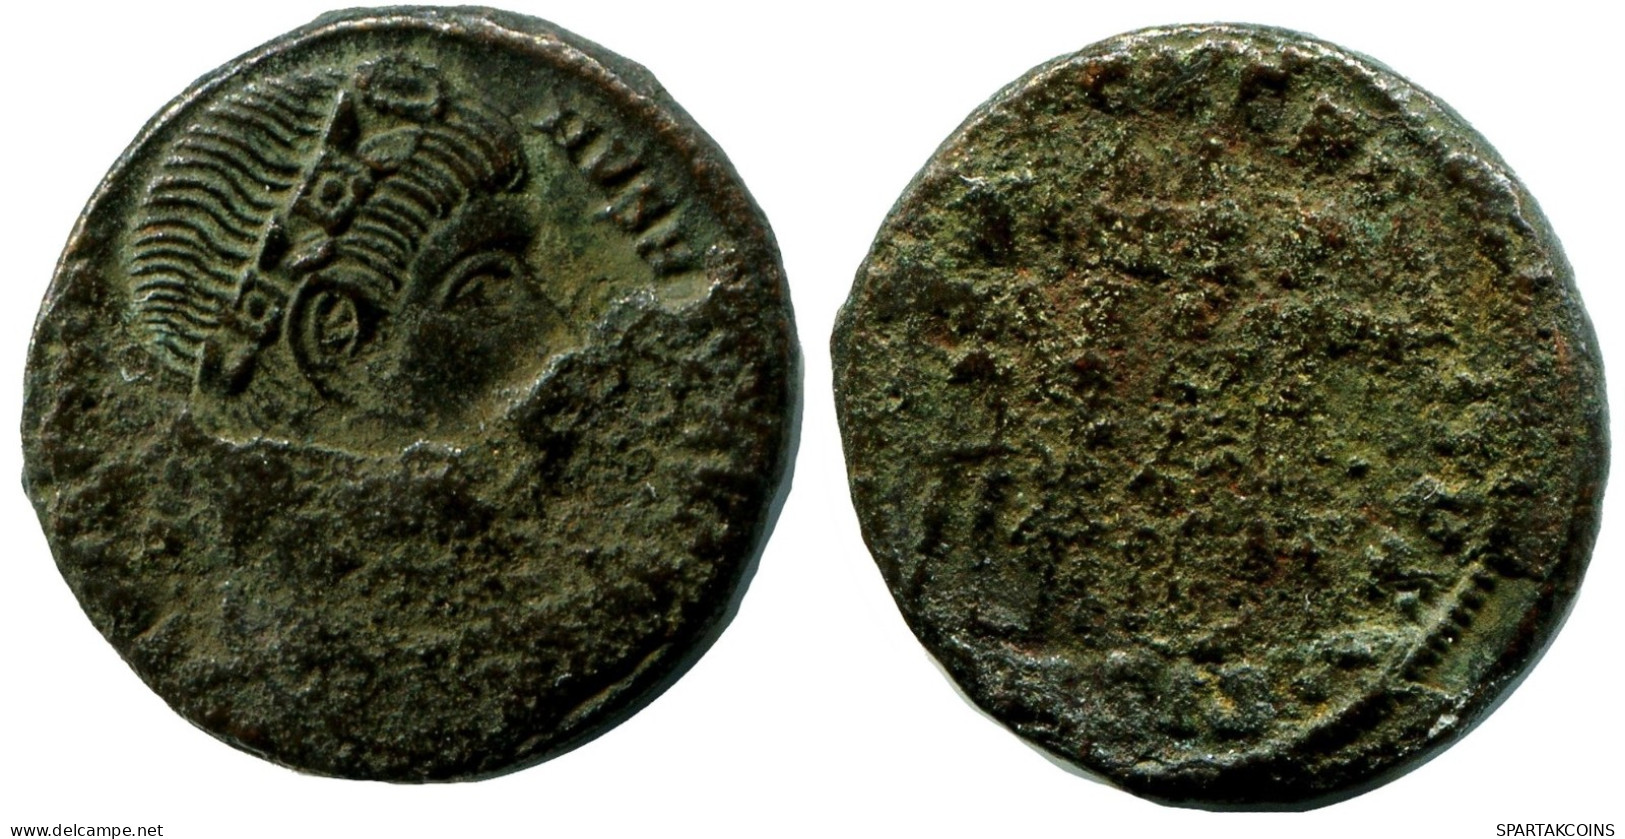 CONSTANTINE I MINTED IN FROM THE ROYAL ONTARIO MUSEUM #ANC11085.14.F.A - Der Christlischen Kaiser (307 / 363)